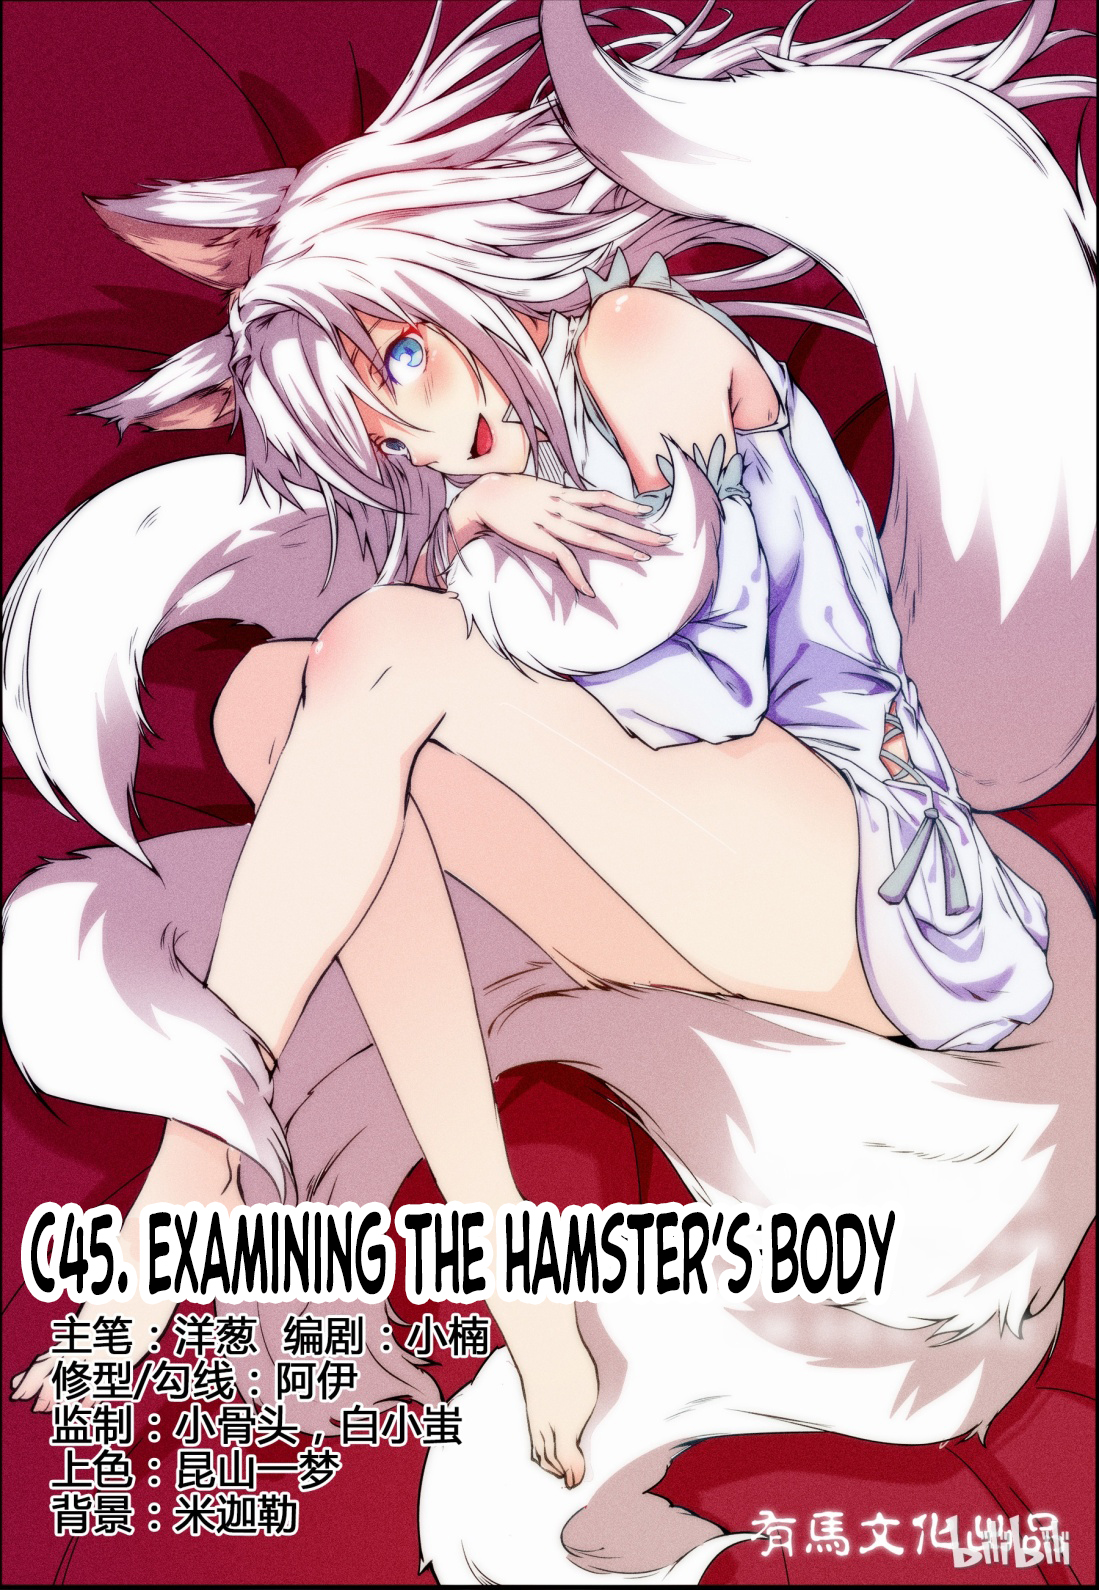 My Wife Is A Fox Spirit Ch. 45 Examining The Hamster's Body